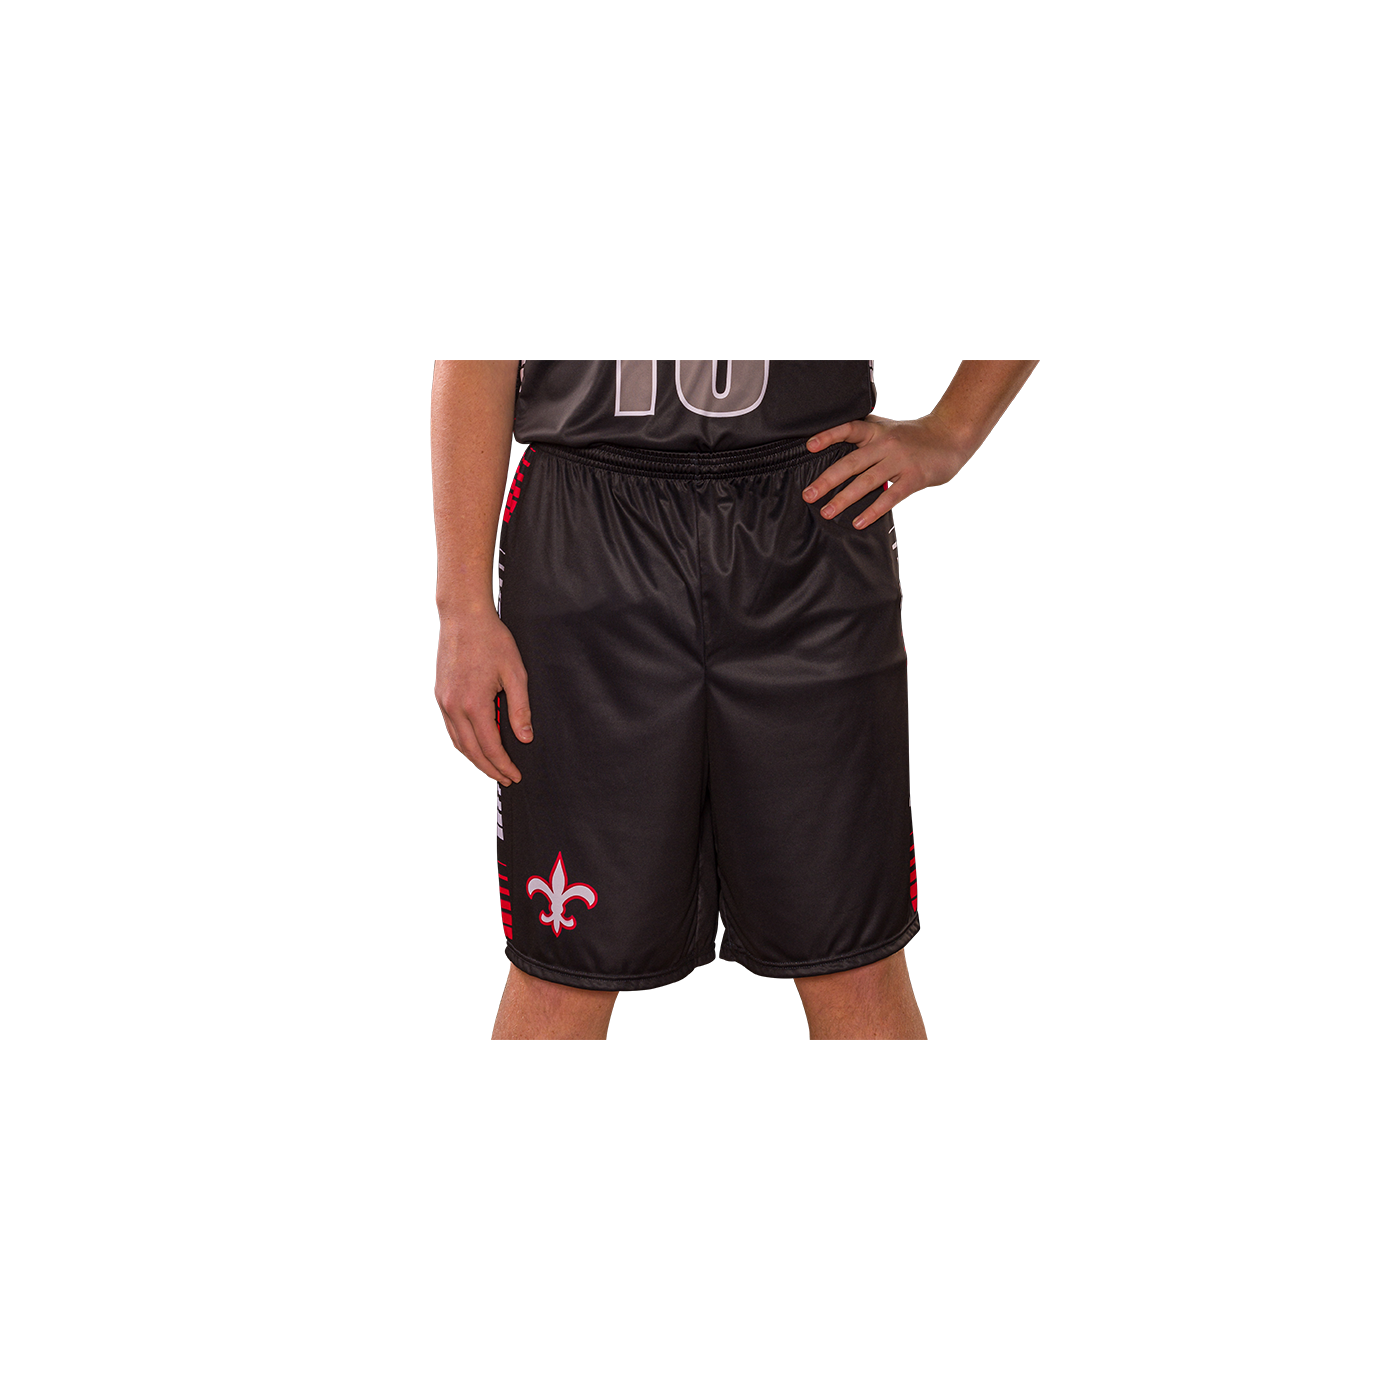 J5K08A_5-Day_Mens-Youth-Basketball_Short_680x680